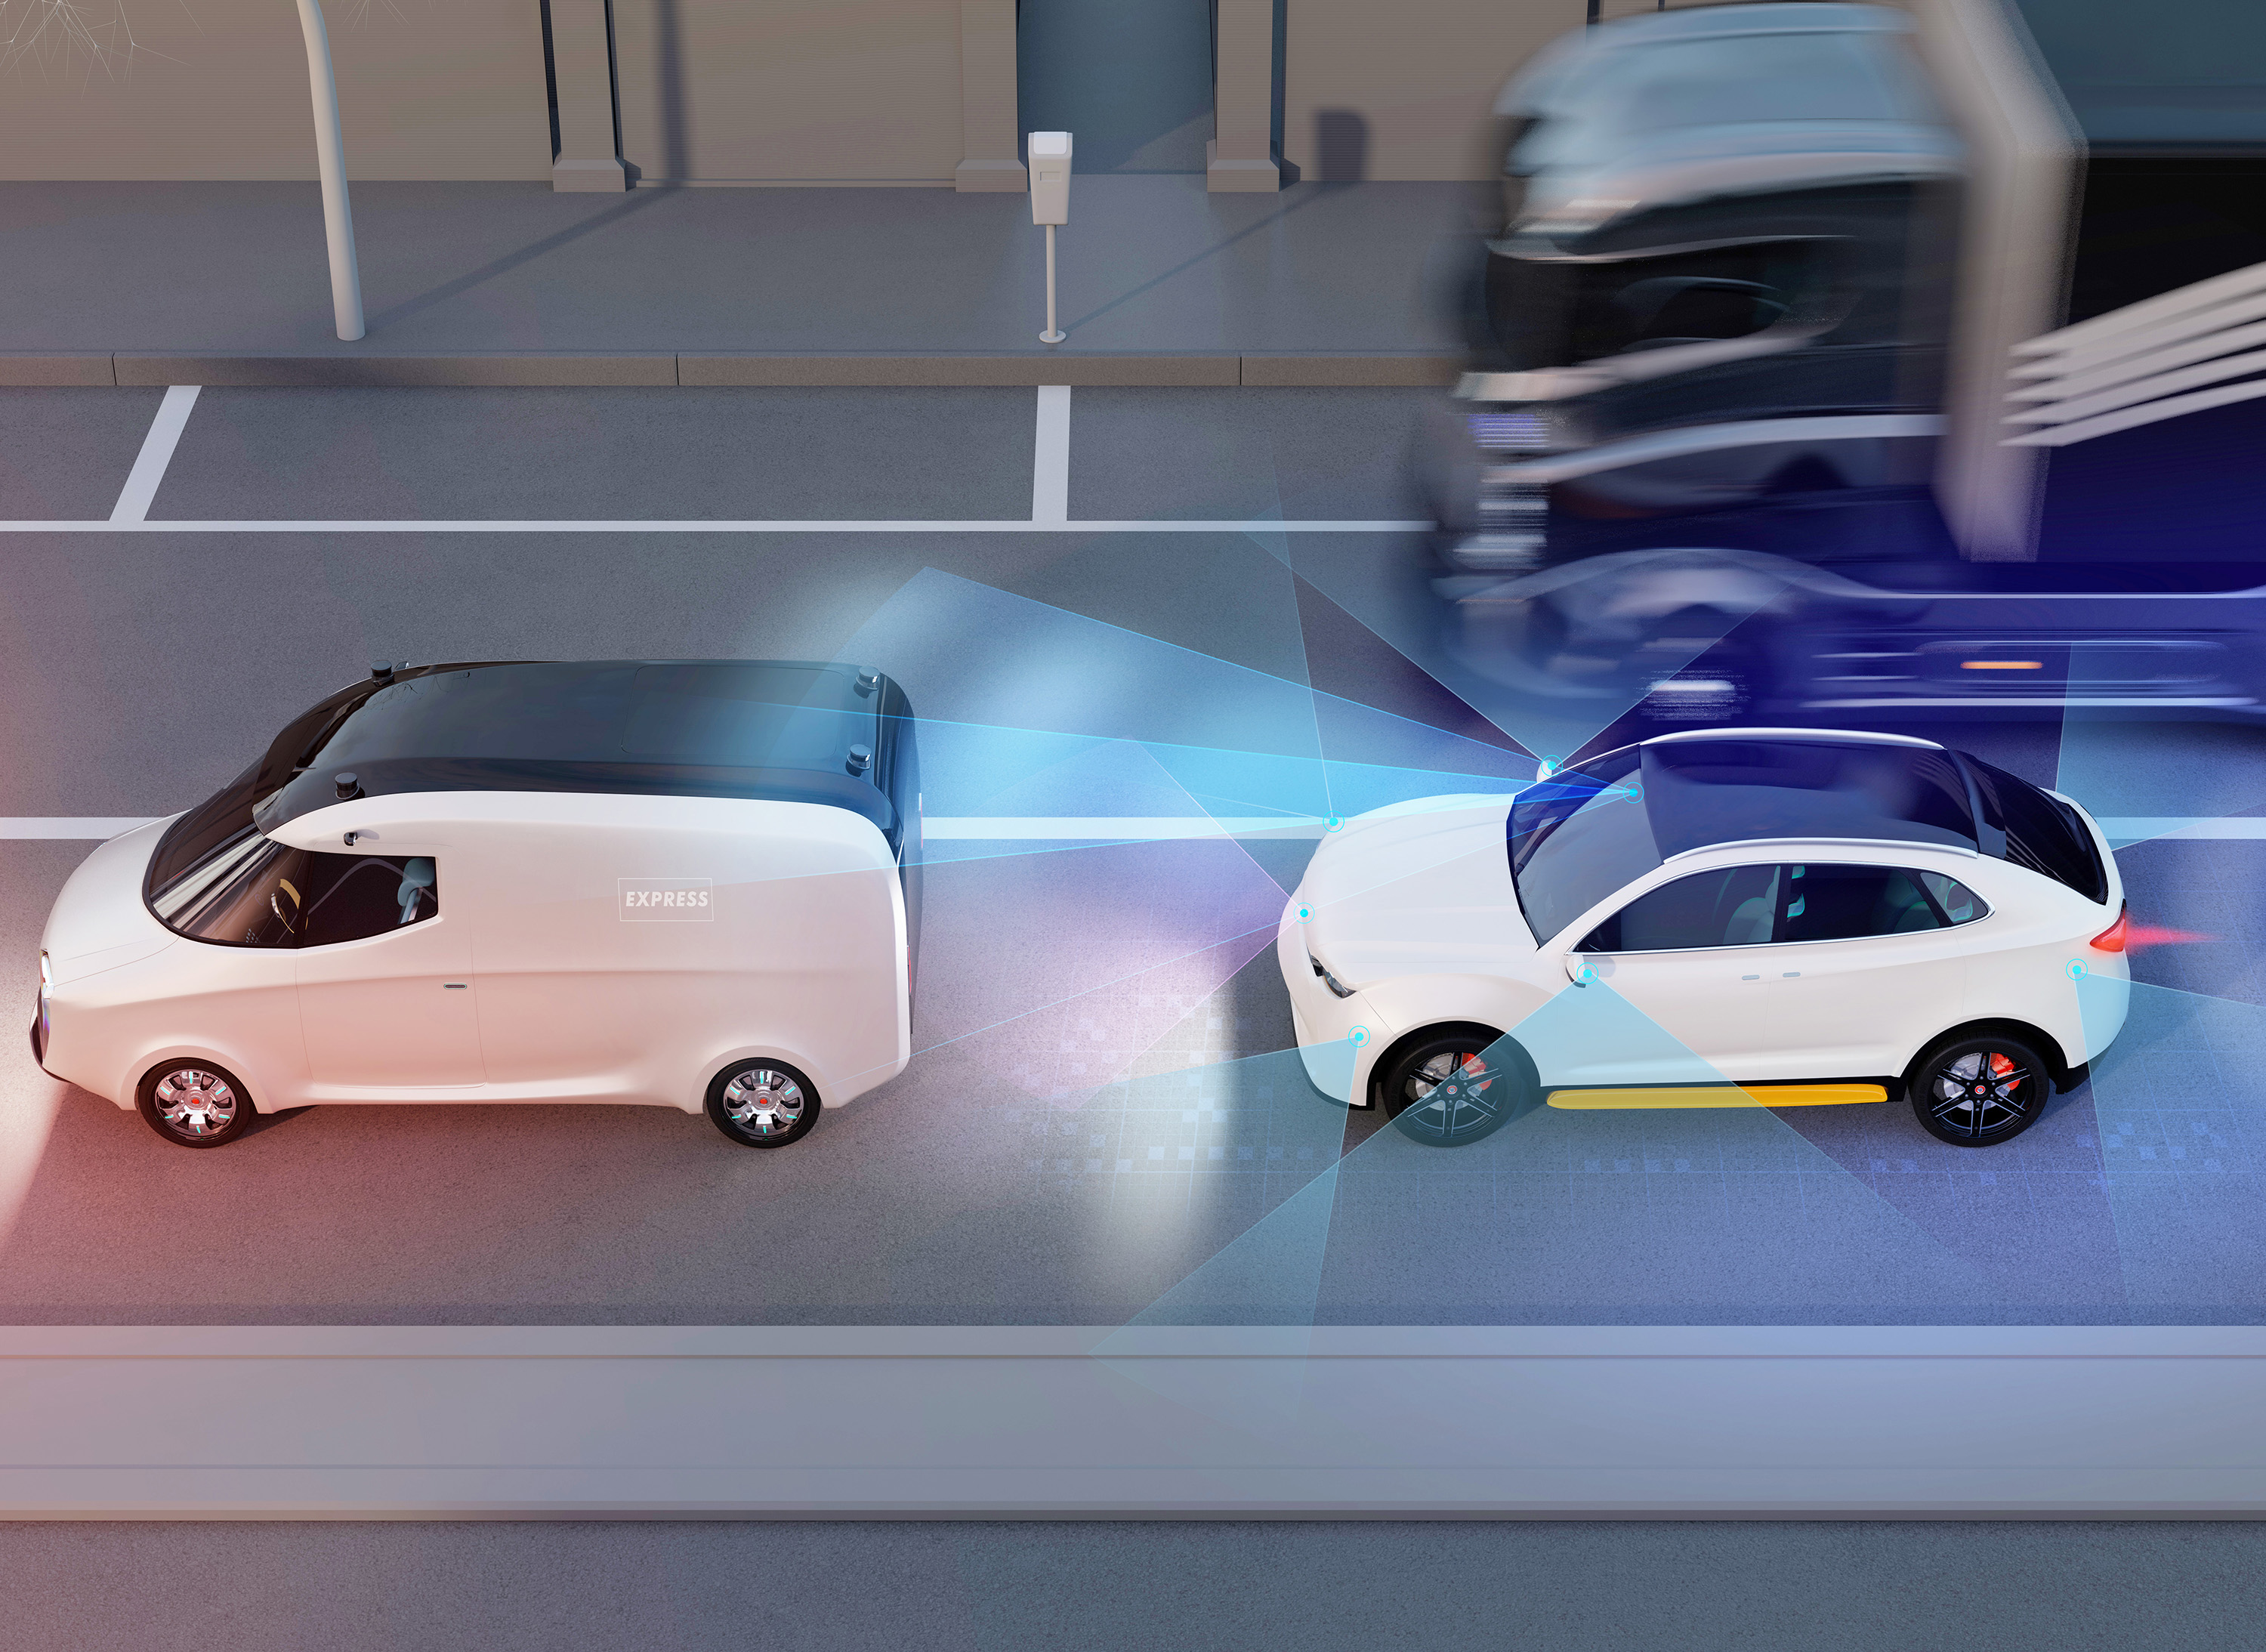 Radar sensors with a good spatial resolution are indispensable for the safety of autonomous vehicles.